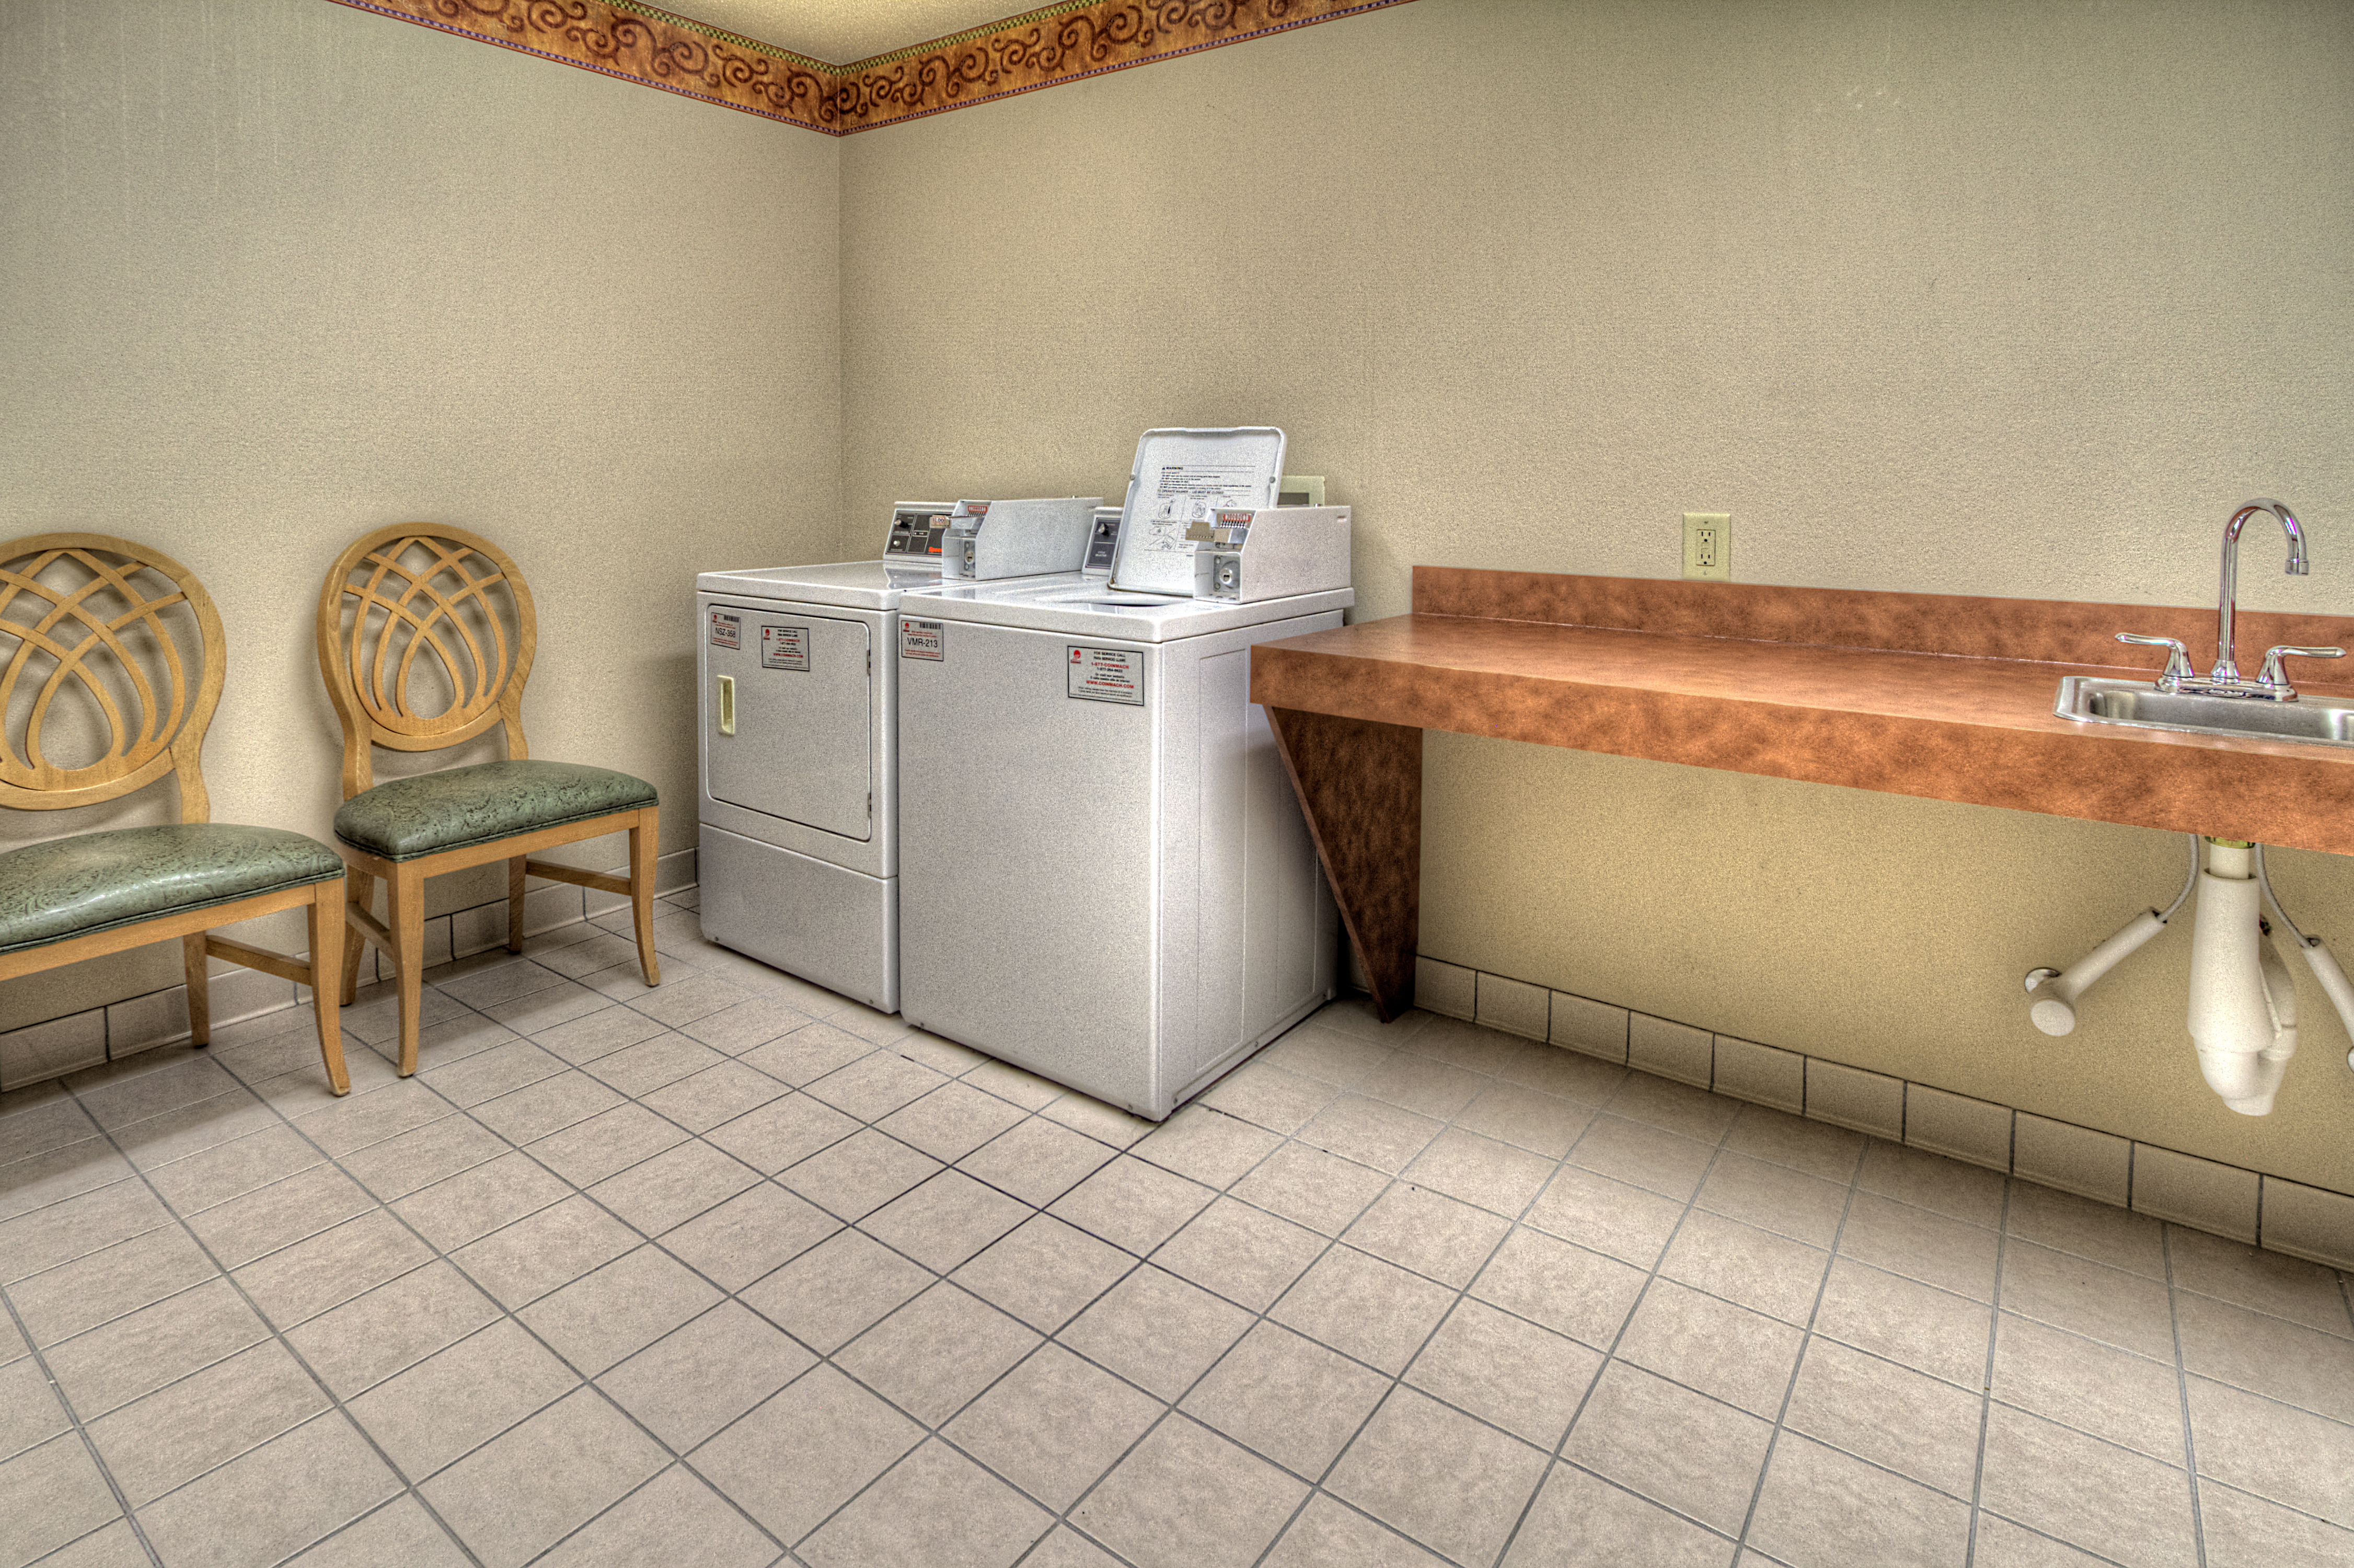 Guest laundry area